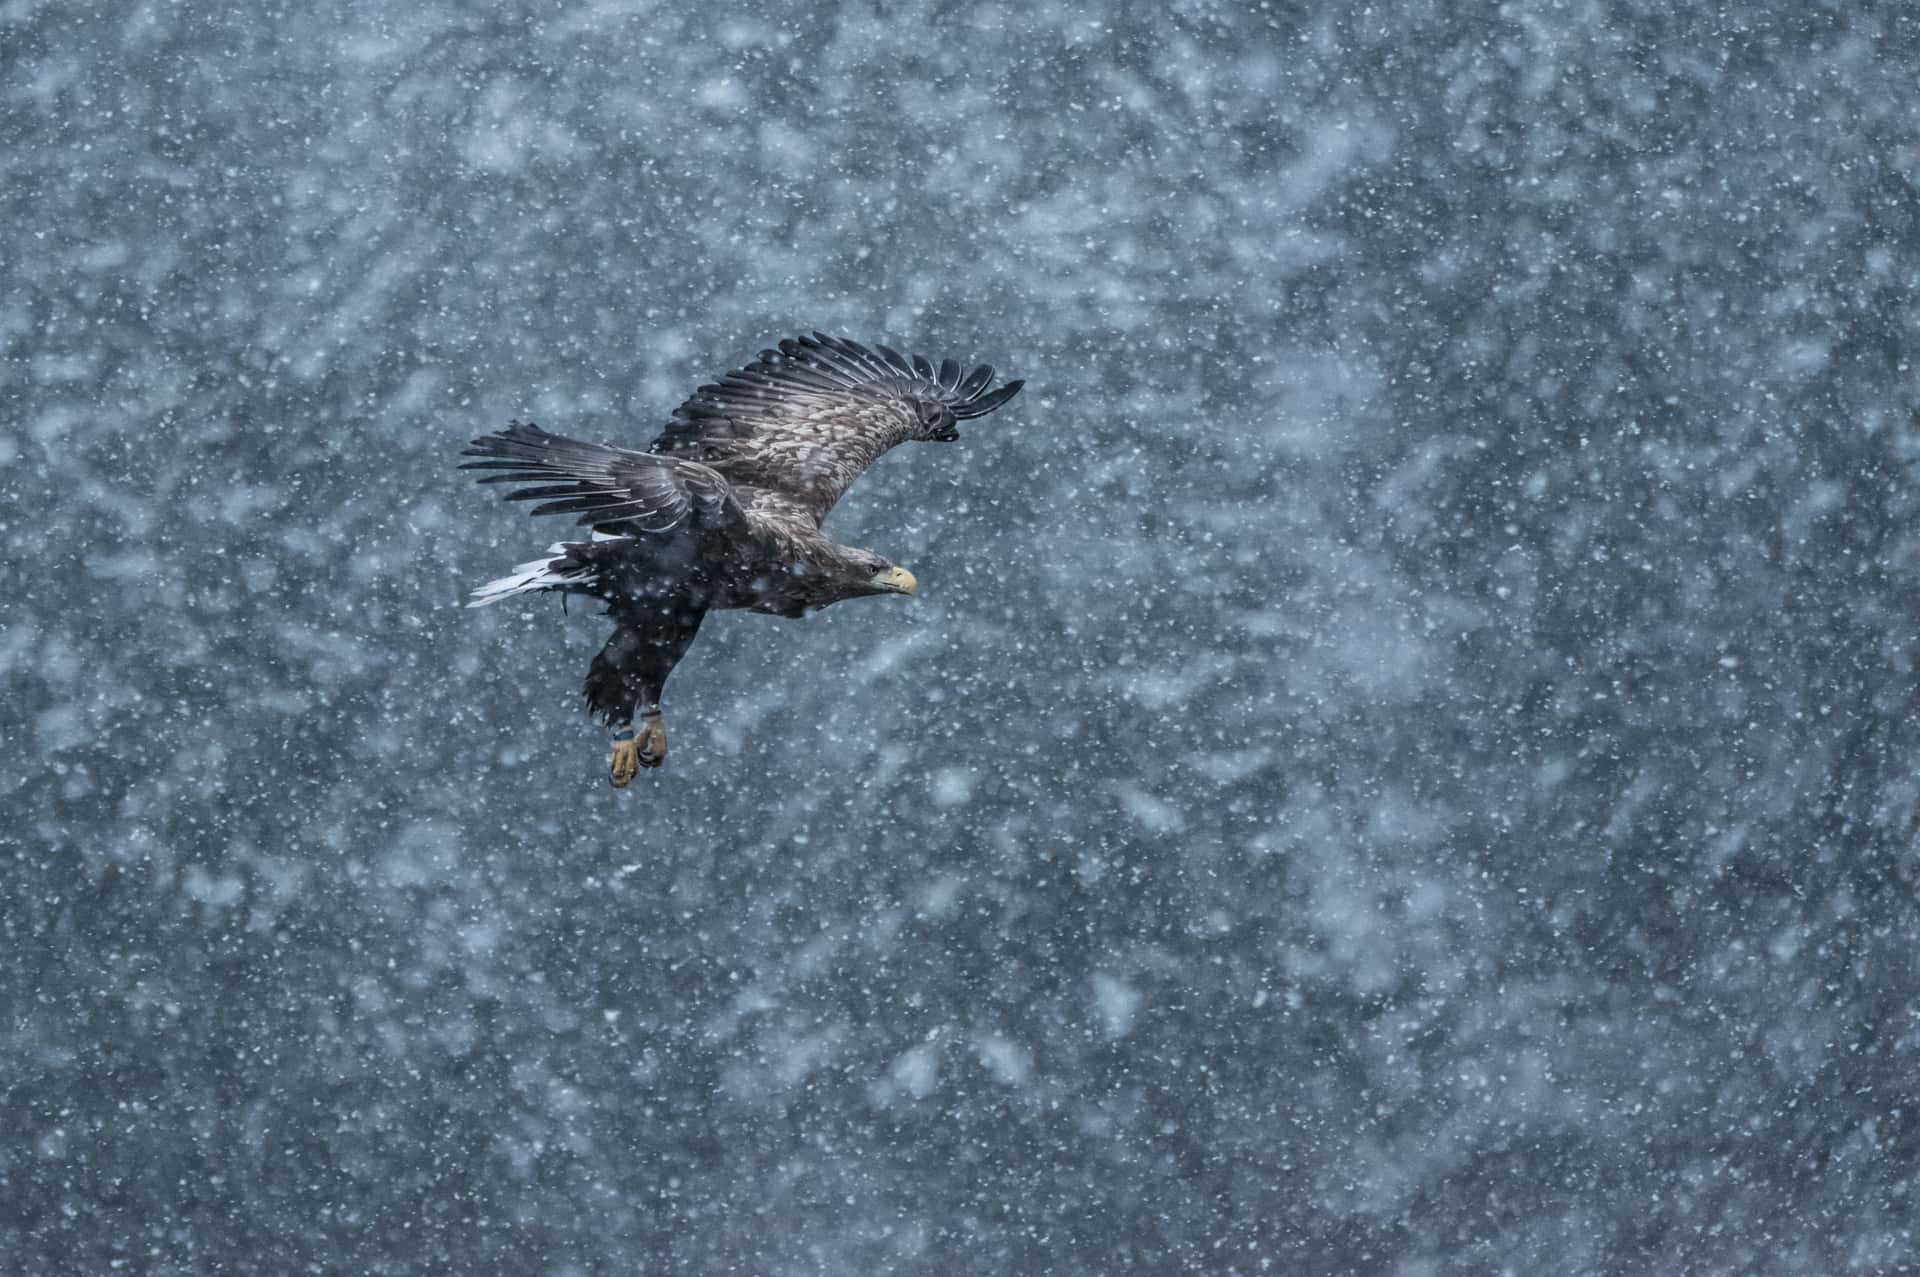 A lone White-tailed Eagle flying through the snow - one of the species photographed during the Winter Eagles of Norway photography holiday